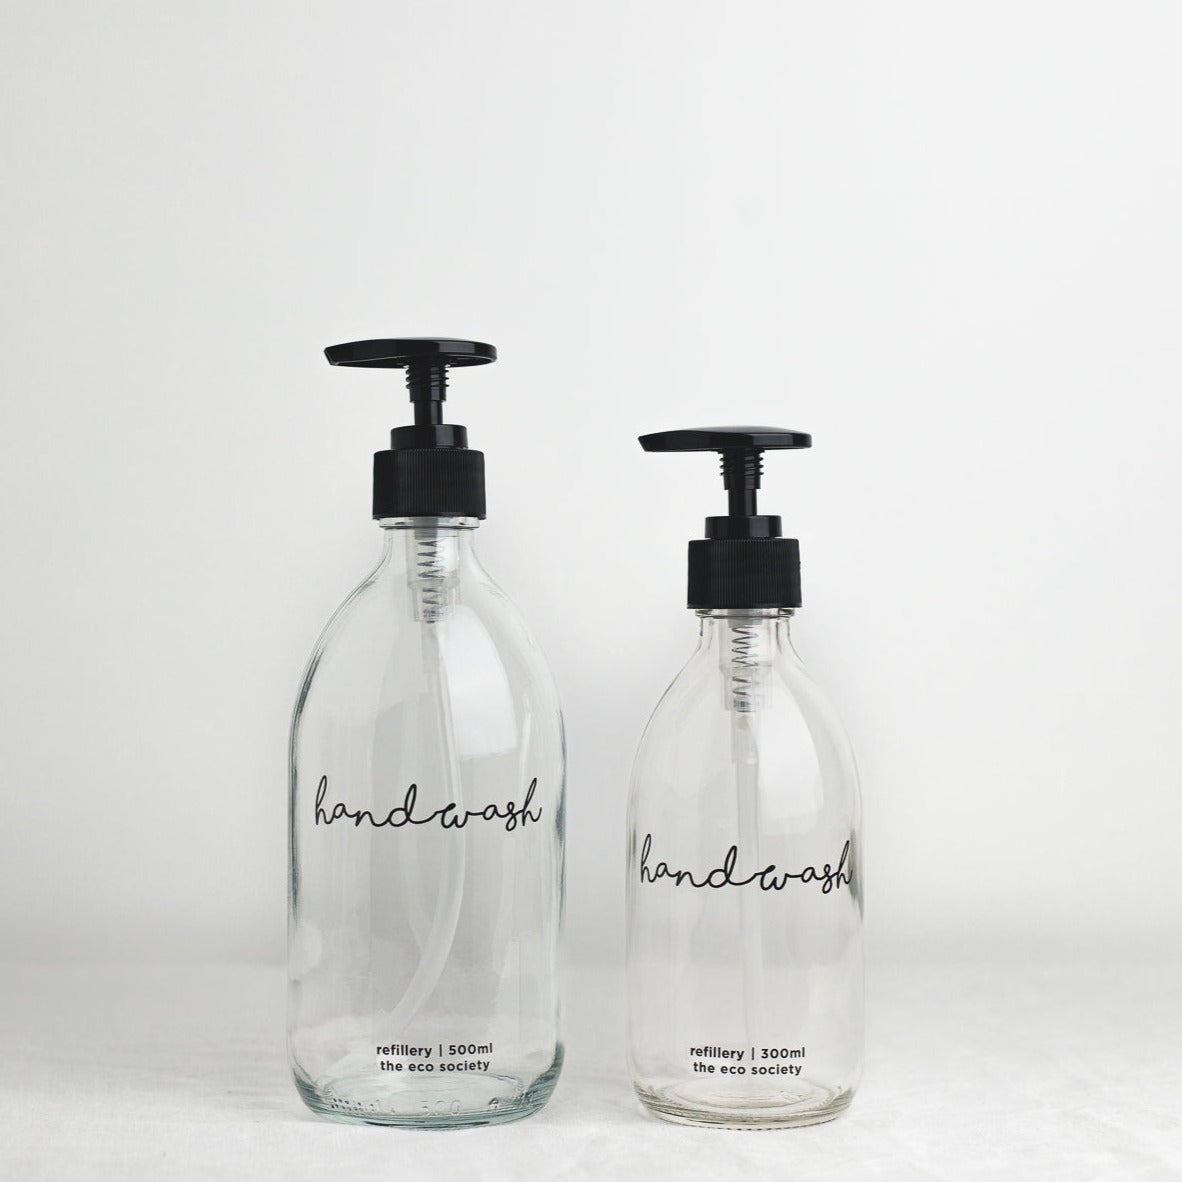 Clear Glass Bottle with Black printed text "Handwash" 300ml and 500ml Refillery Bottle 